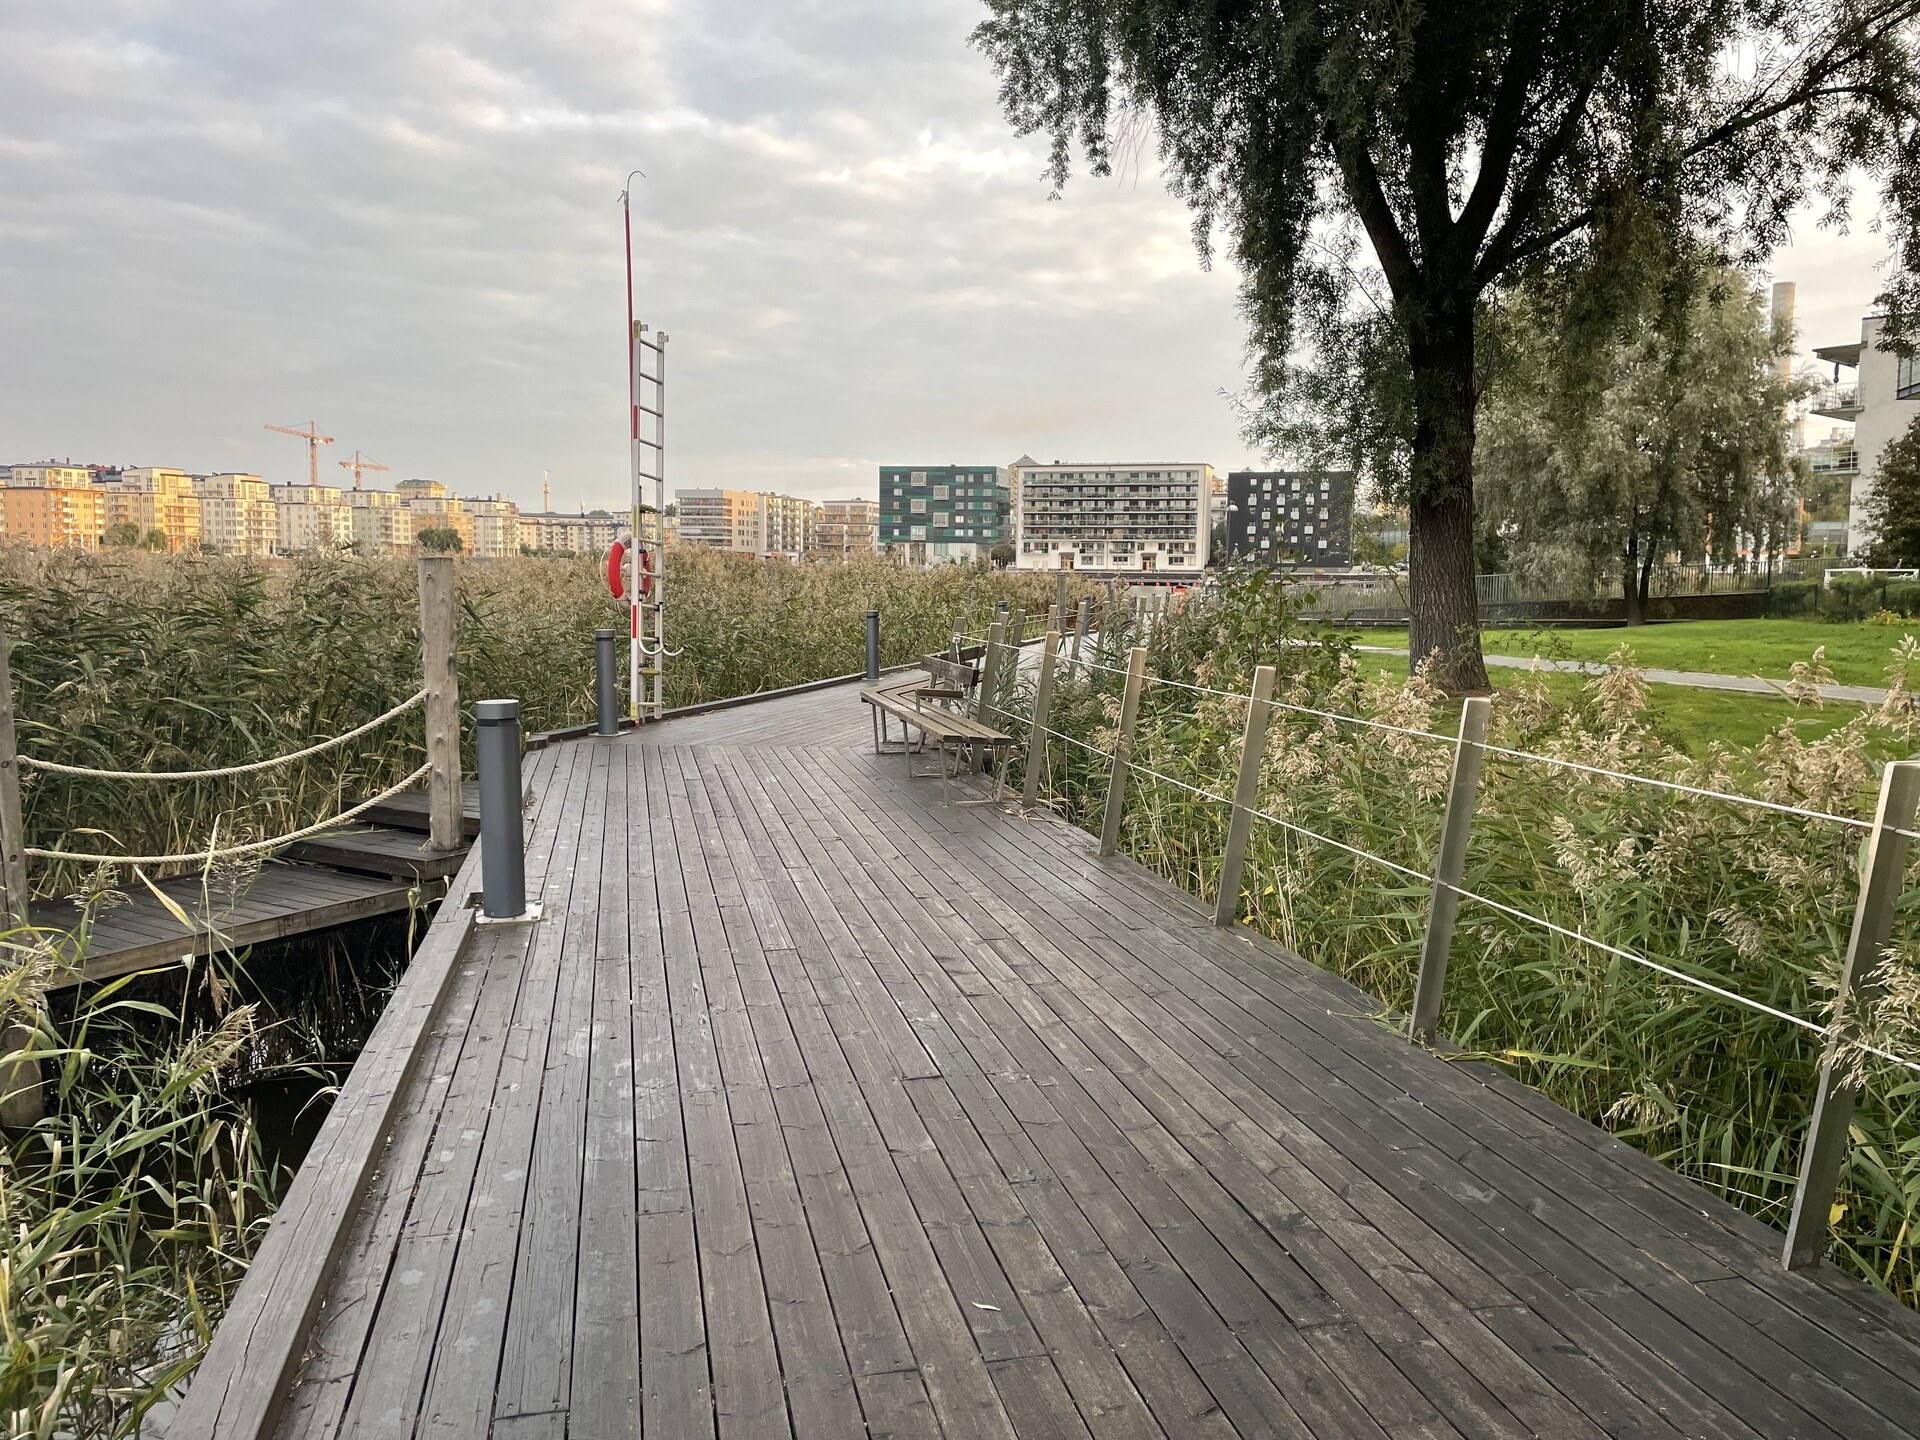 A boardwalk winding between reeds and lawns, with midrise apartments on the far shore of the lake in the background